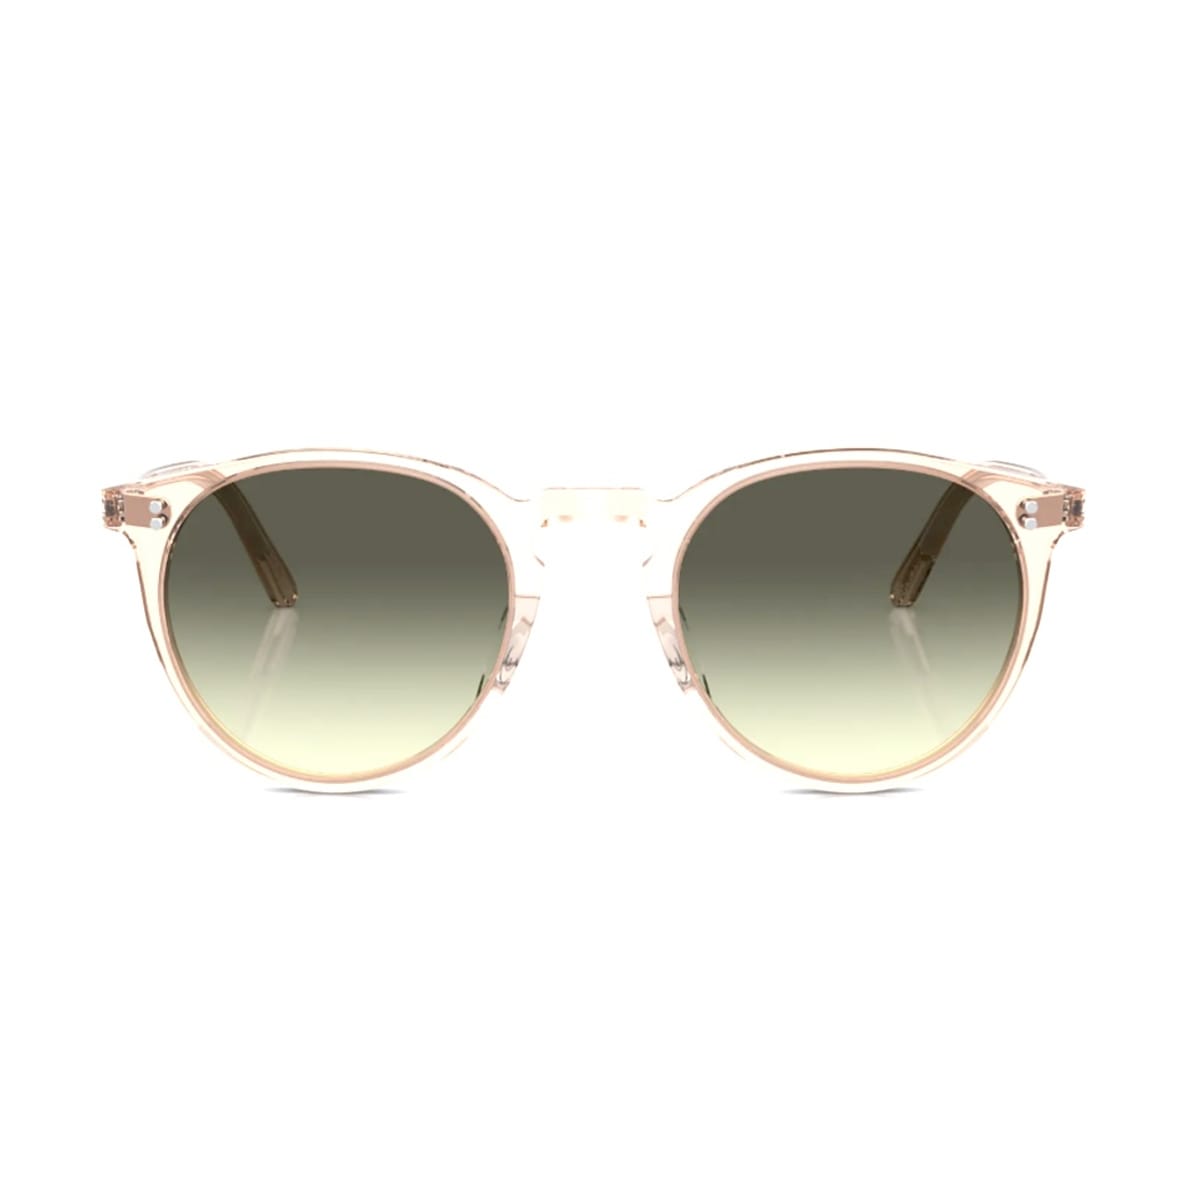 Shop Oliver Peoples Ov5183s 1758bh Sunglasses In Rosa